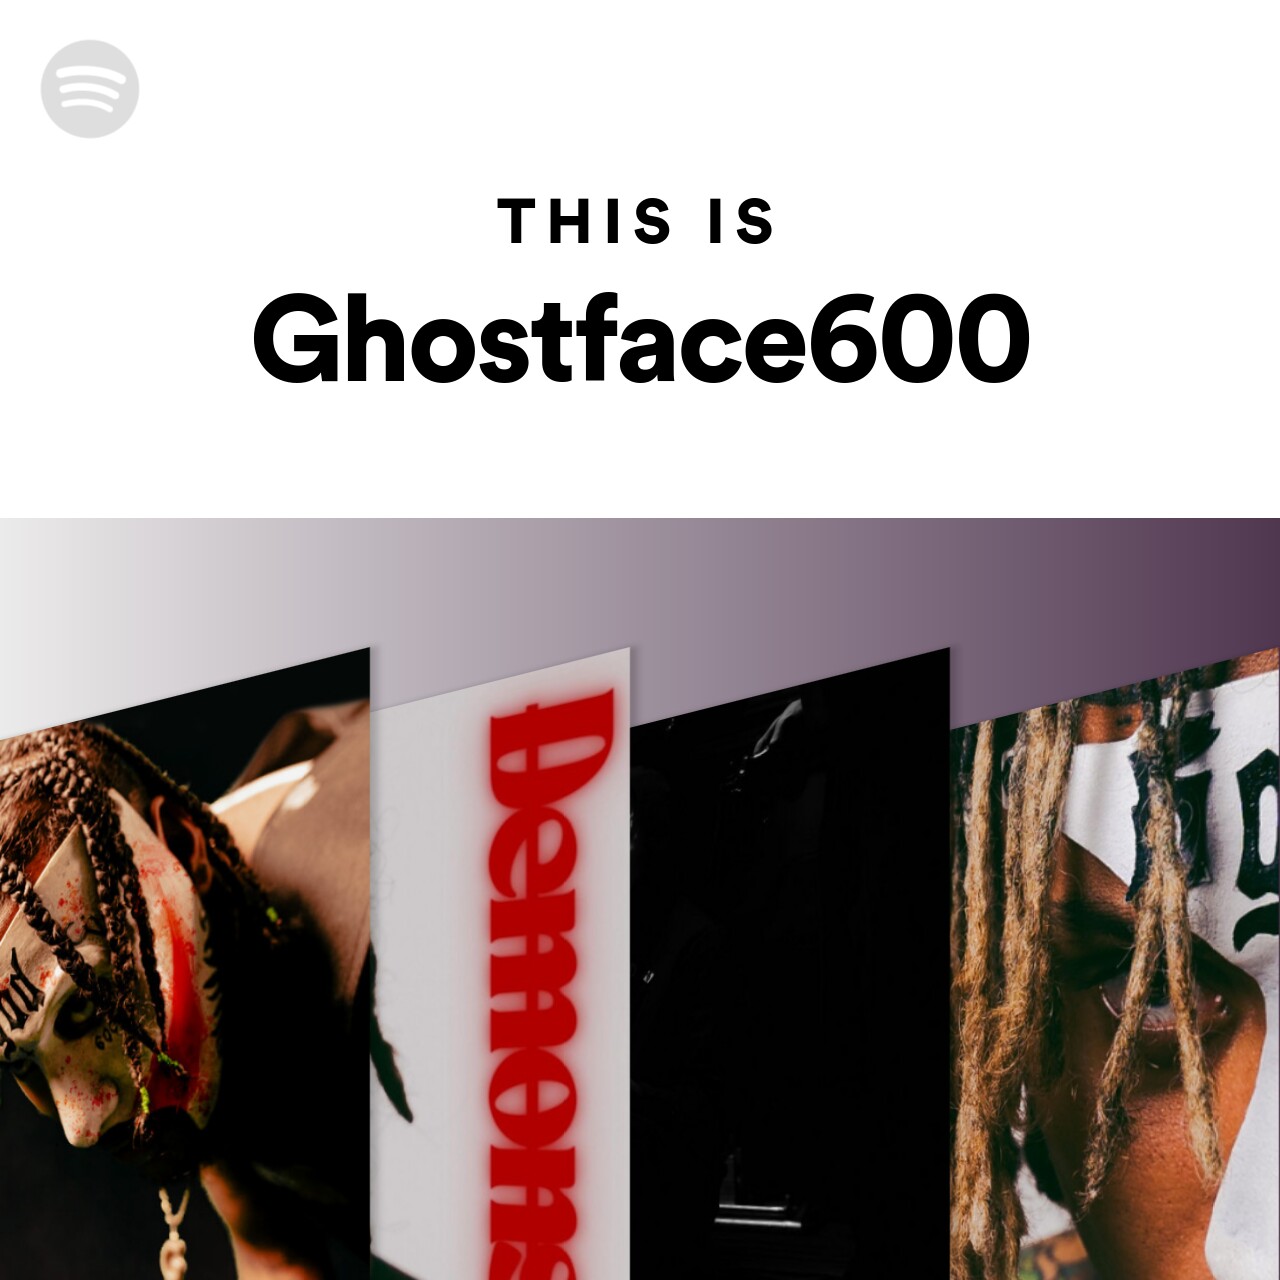 This Is Ghostface600